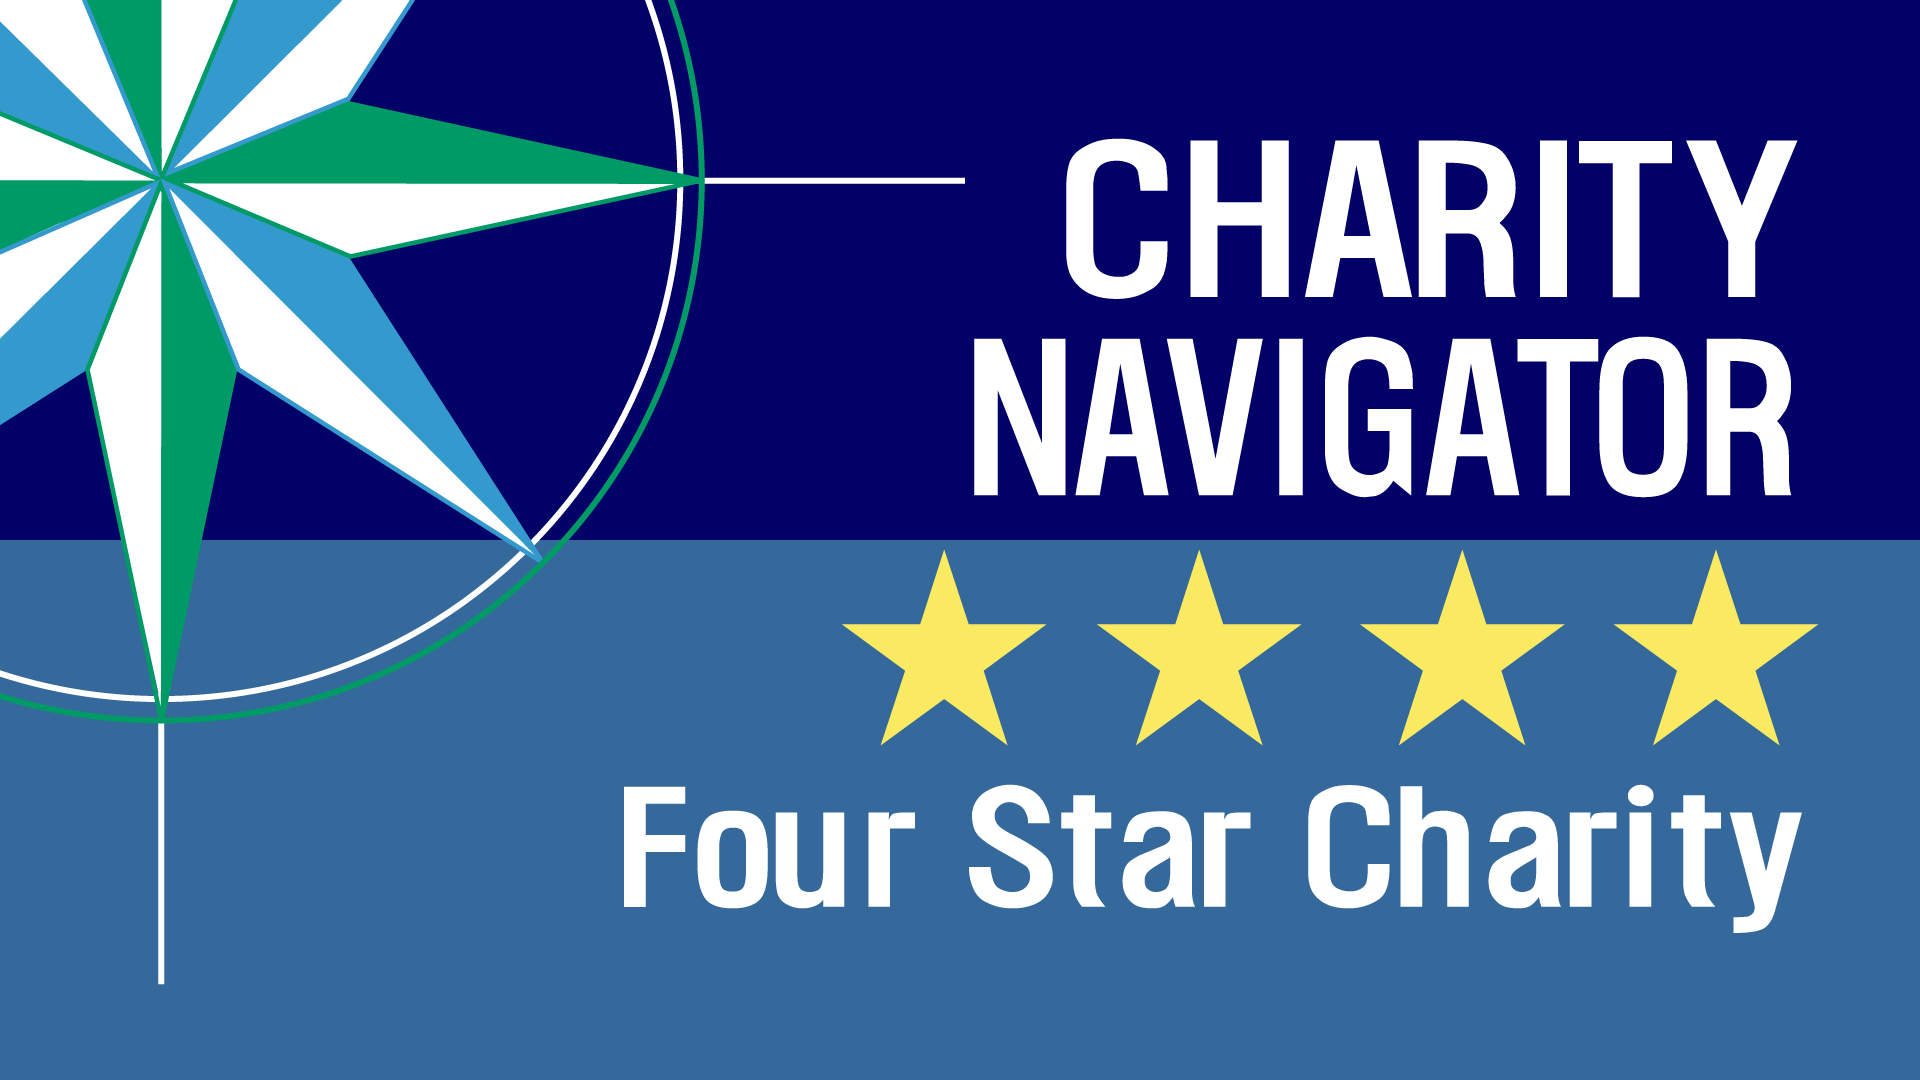 Charity Navigator Logo feature four star charity designation. Link to LBBC profile page.